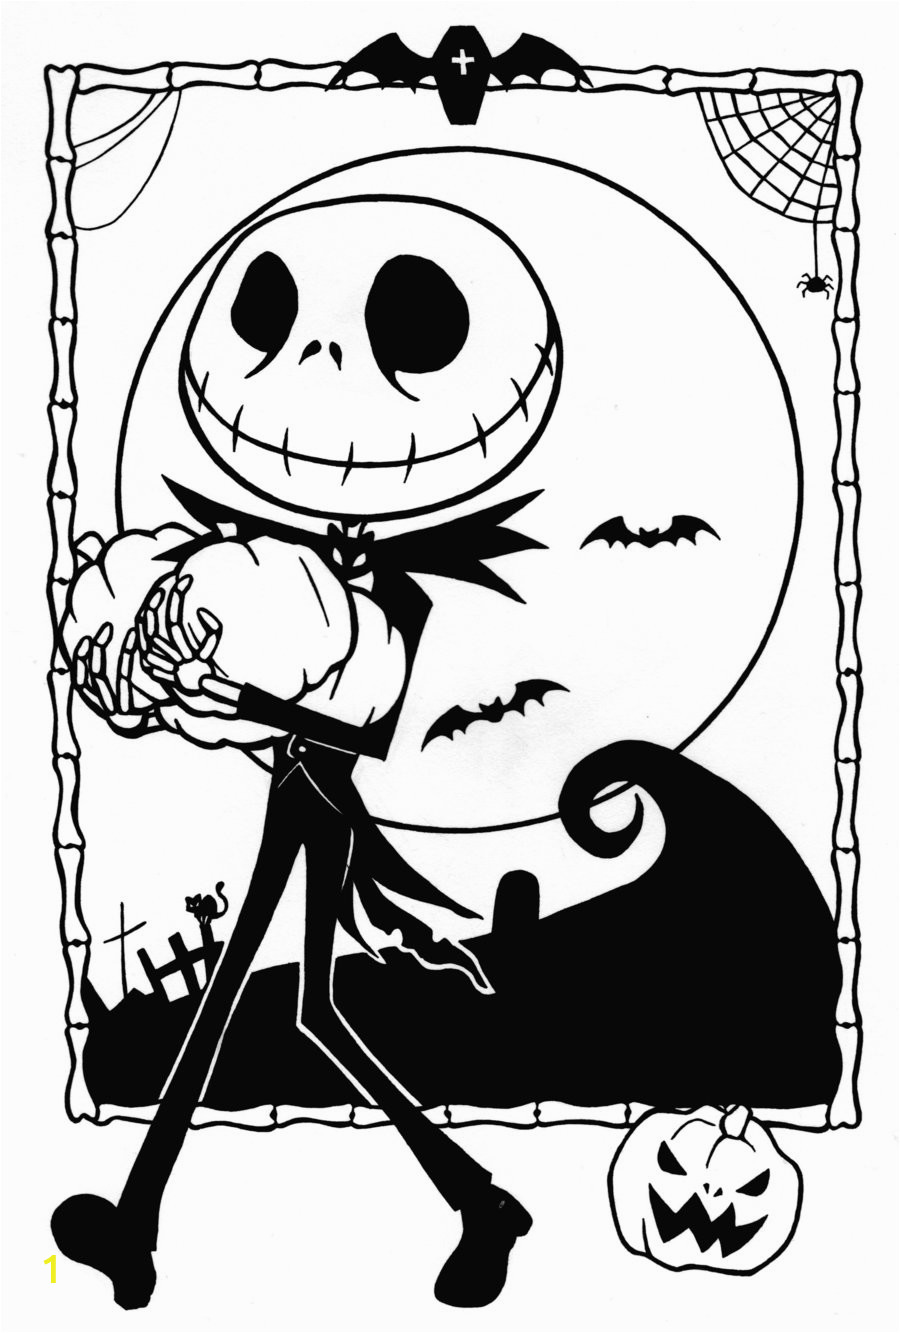 Coloring Pages Of Nightmare before Christmas Free Printable Nightmare before Christmas Coloring Pages